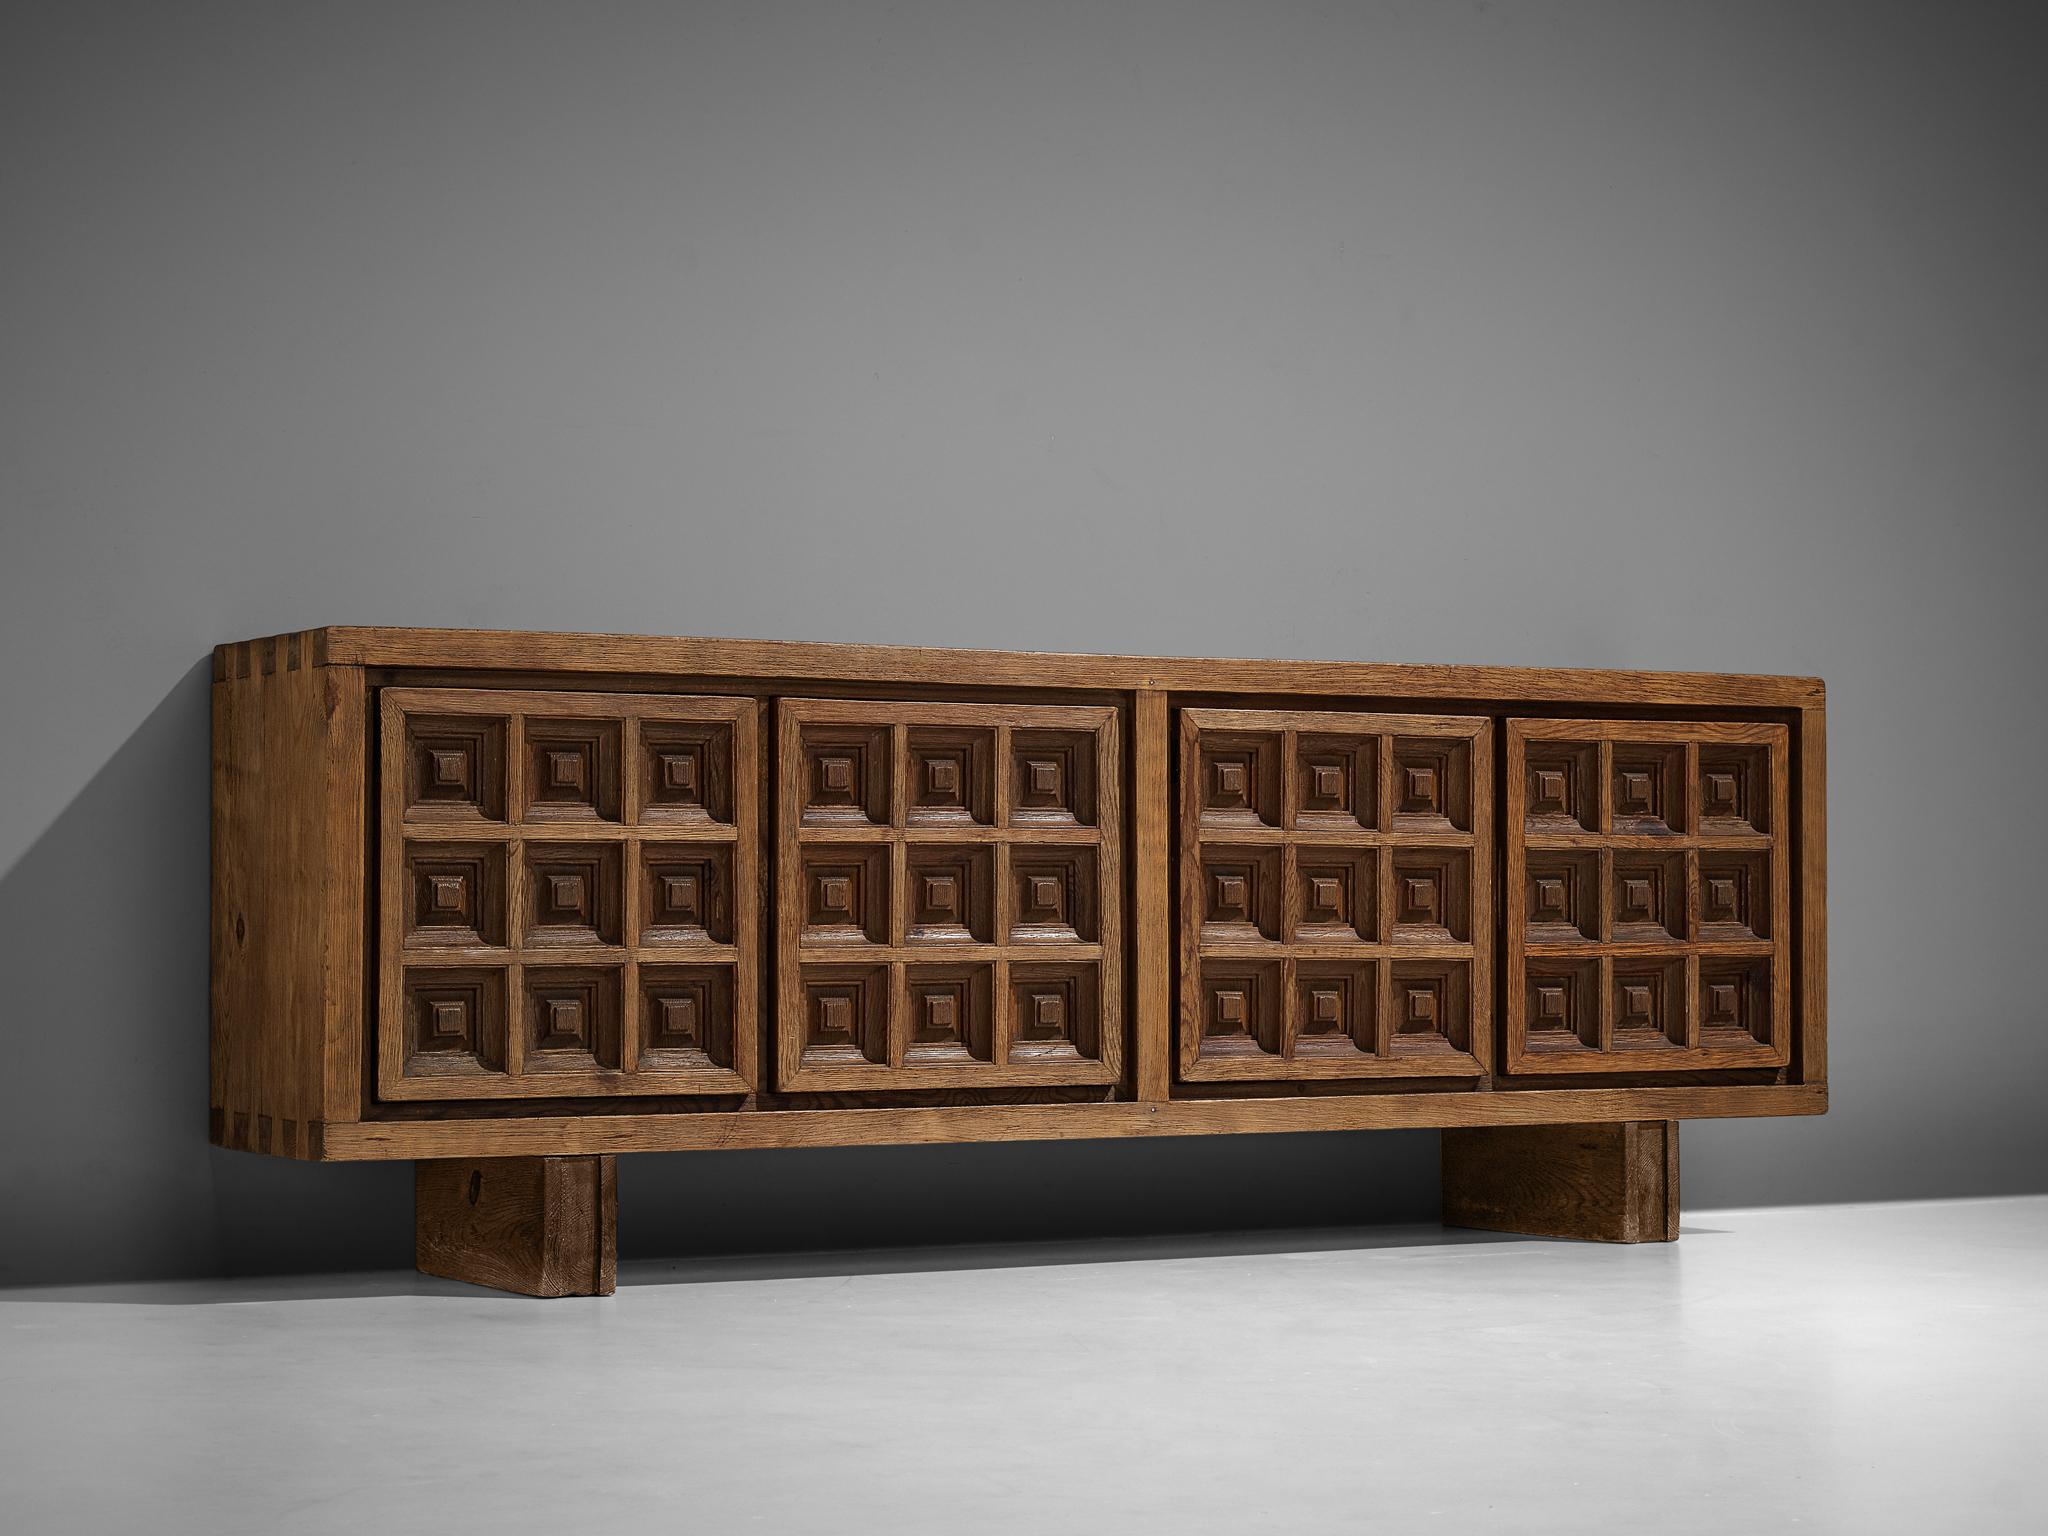 Biosca, sideboard, stained pine, Spain, 1960s

Outstanding Spanish sideboard that is executed by Biosca in a beautiful way. The four-door credenza features doors with a graphic carved pattern. This is very typical for Brutalist style, while the type